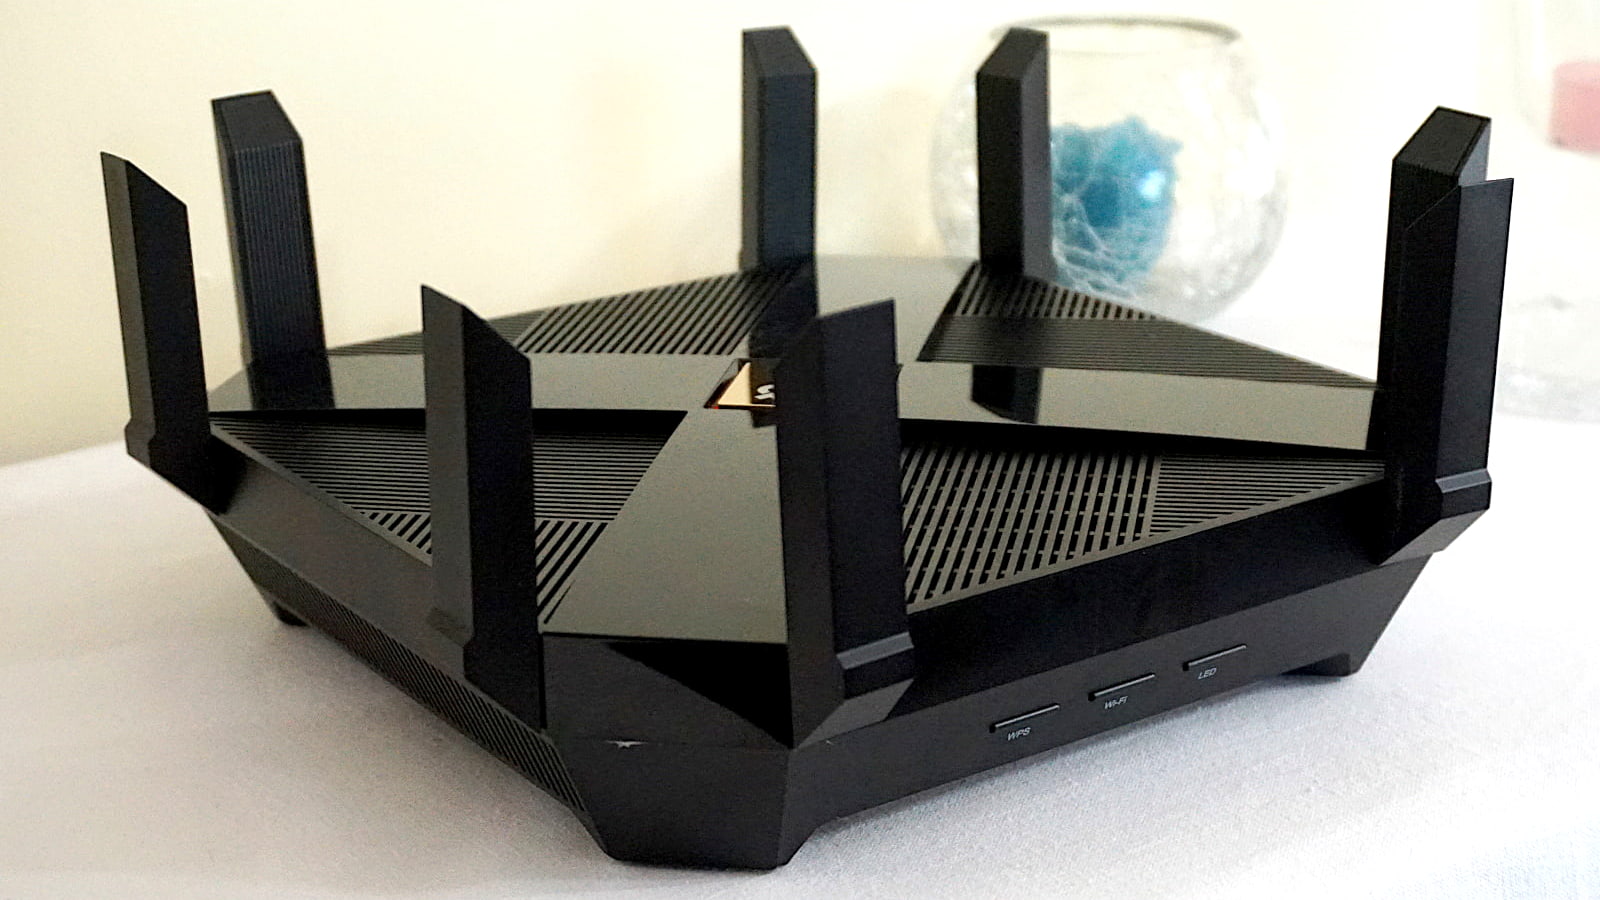 5 Best Wi-Fi Routers for High Speed Internet in 2023